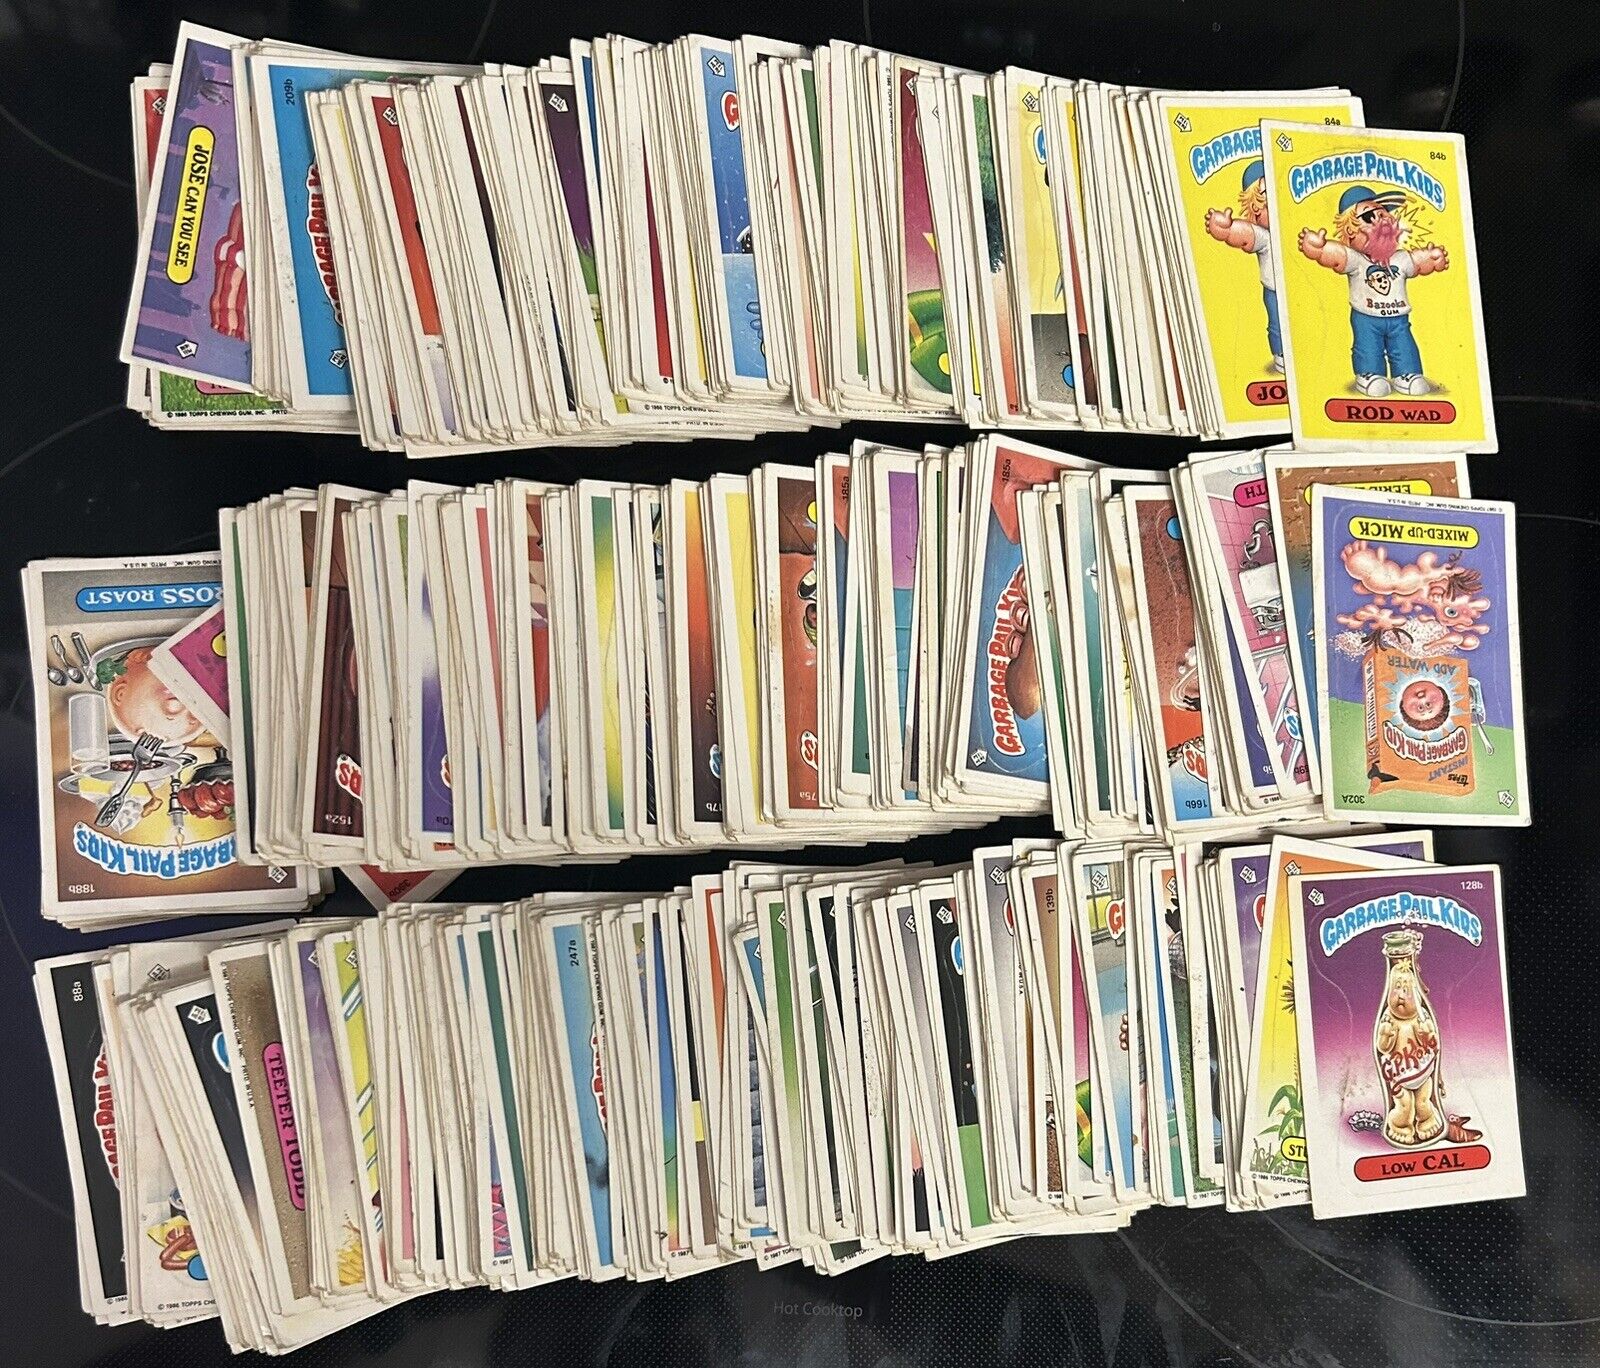 Vintage Garbage Pail Kids Lot 650+ Cards Low-Mid Grade 1980s Topps GPK Cards